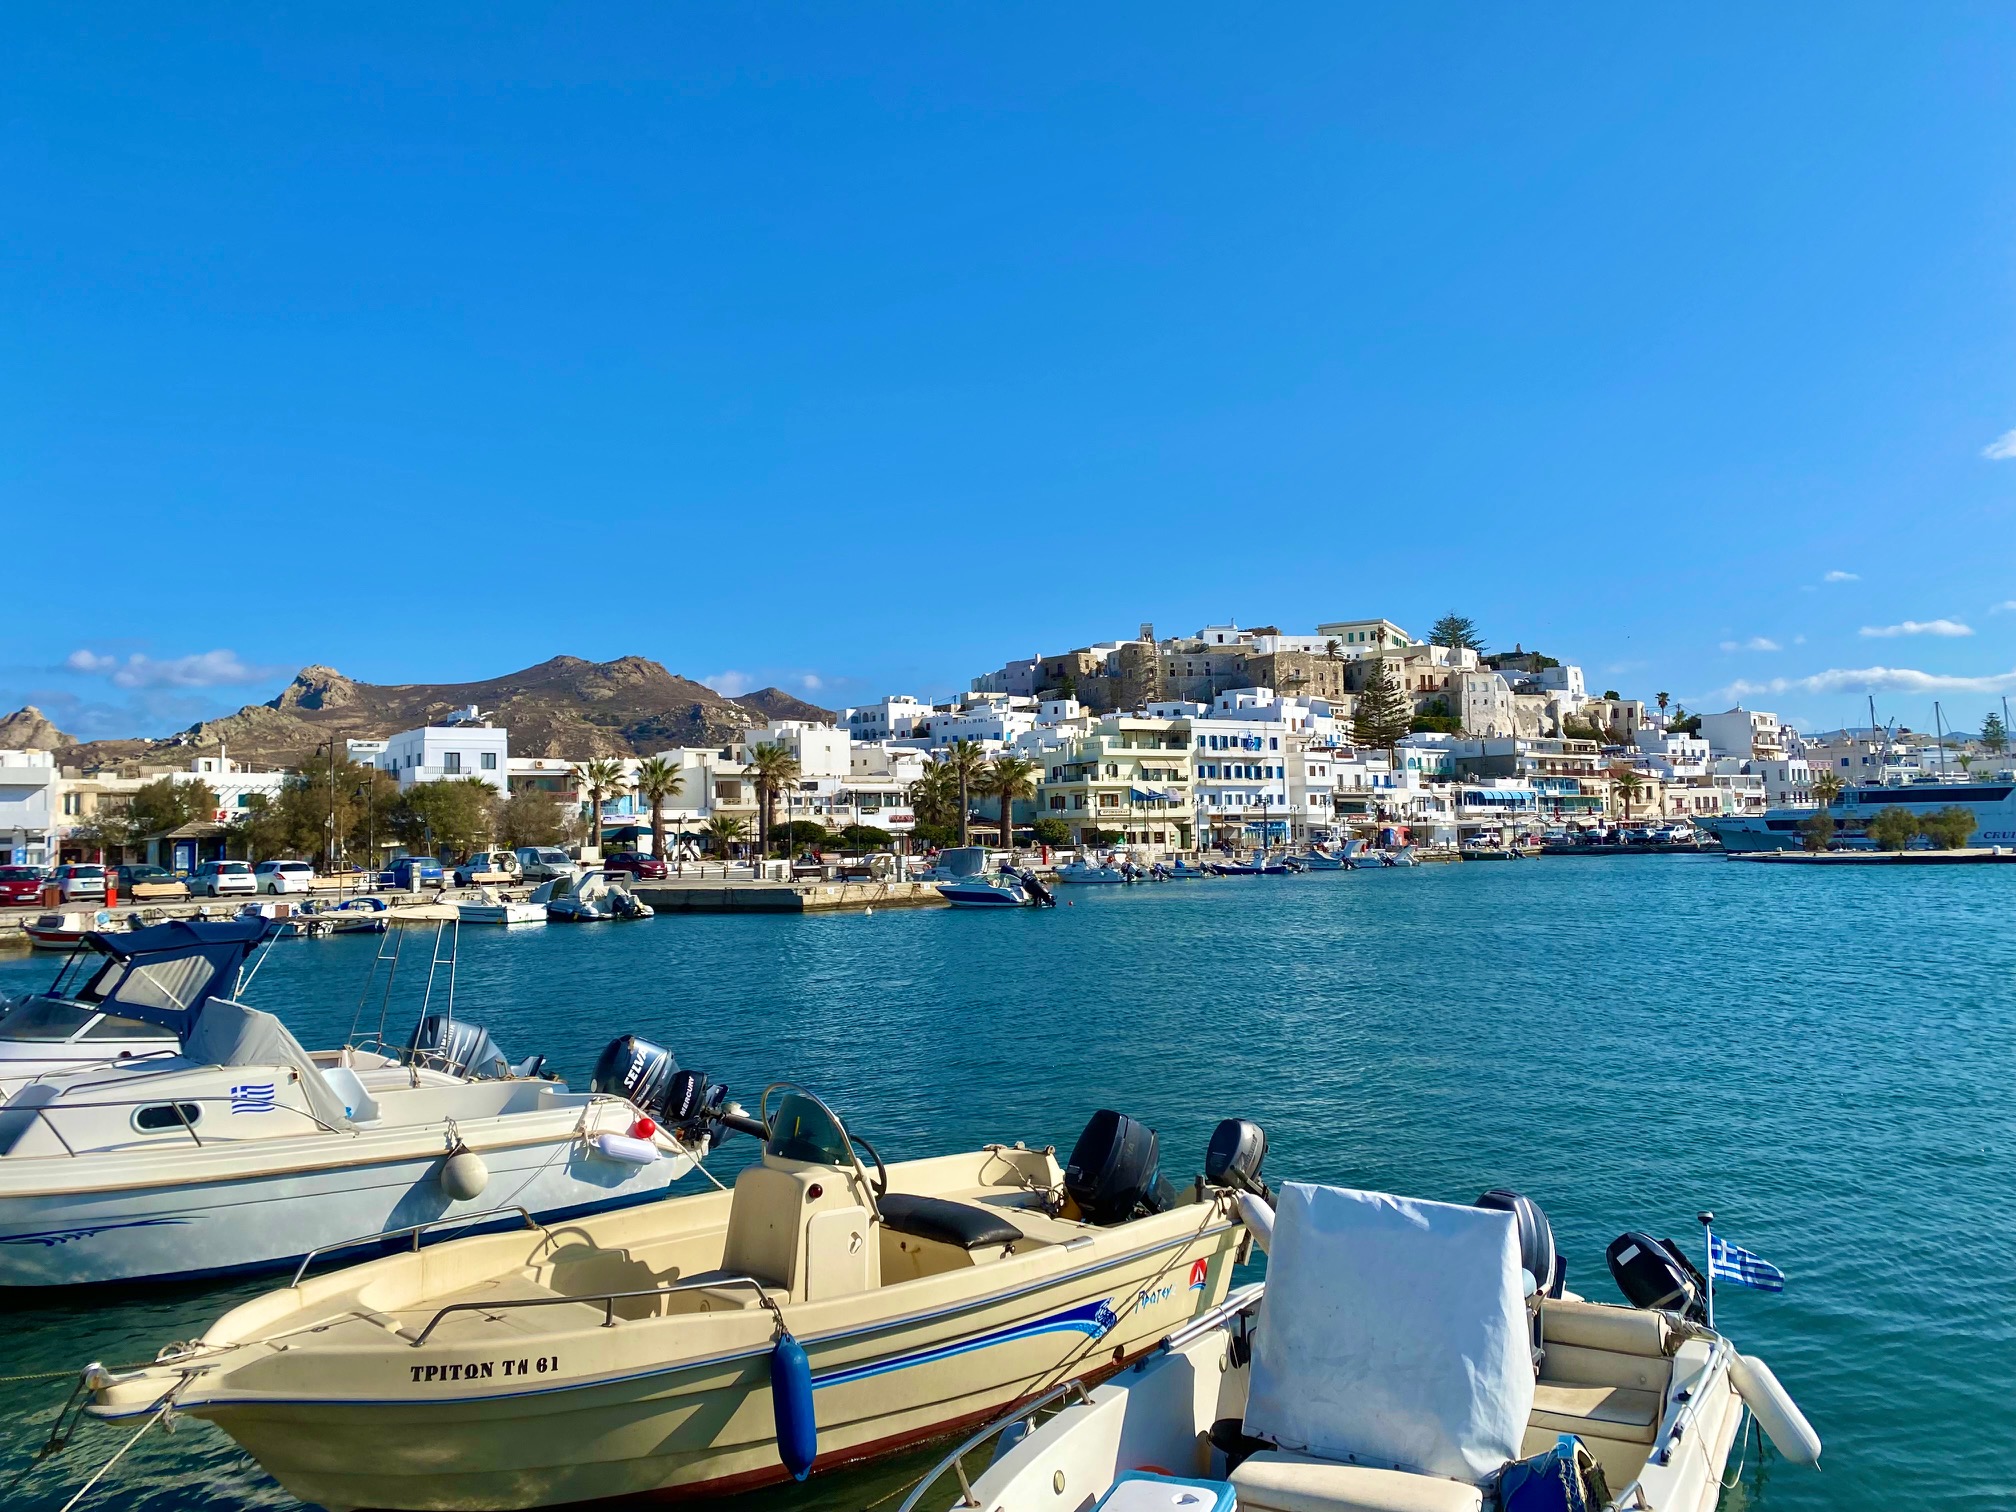 Small speedboats on turquoise water with a whitewashed town in the background | Naxos Greece - Naxos Travel Guide | greekislandbucketlist.com